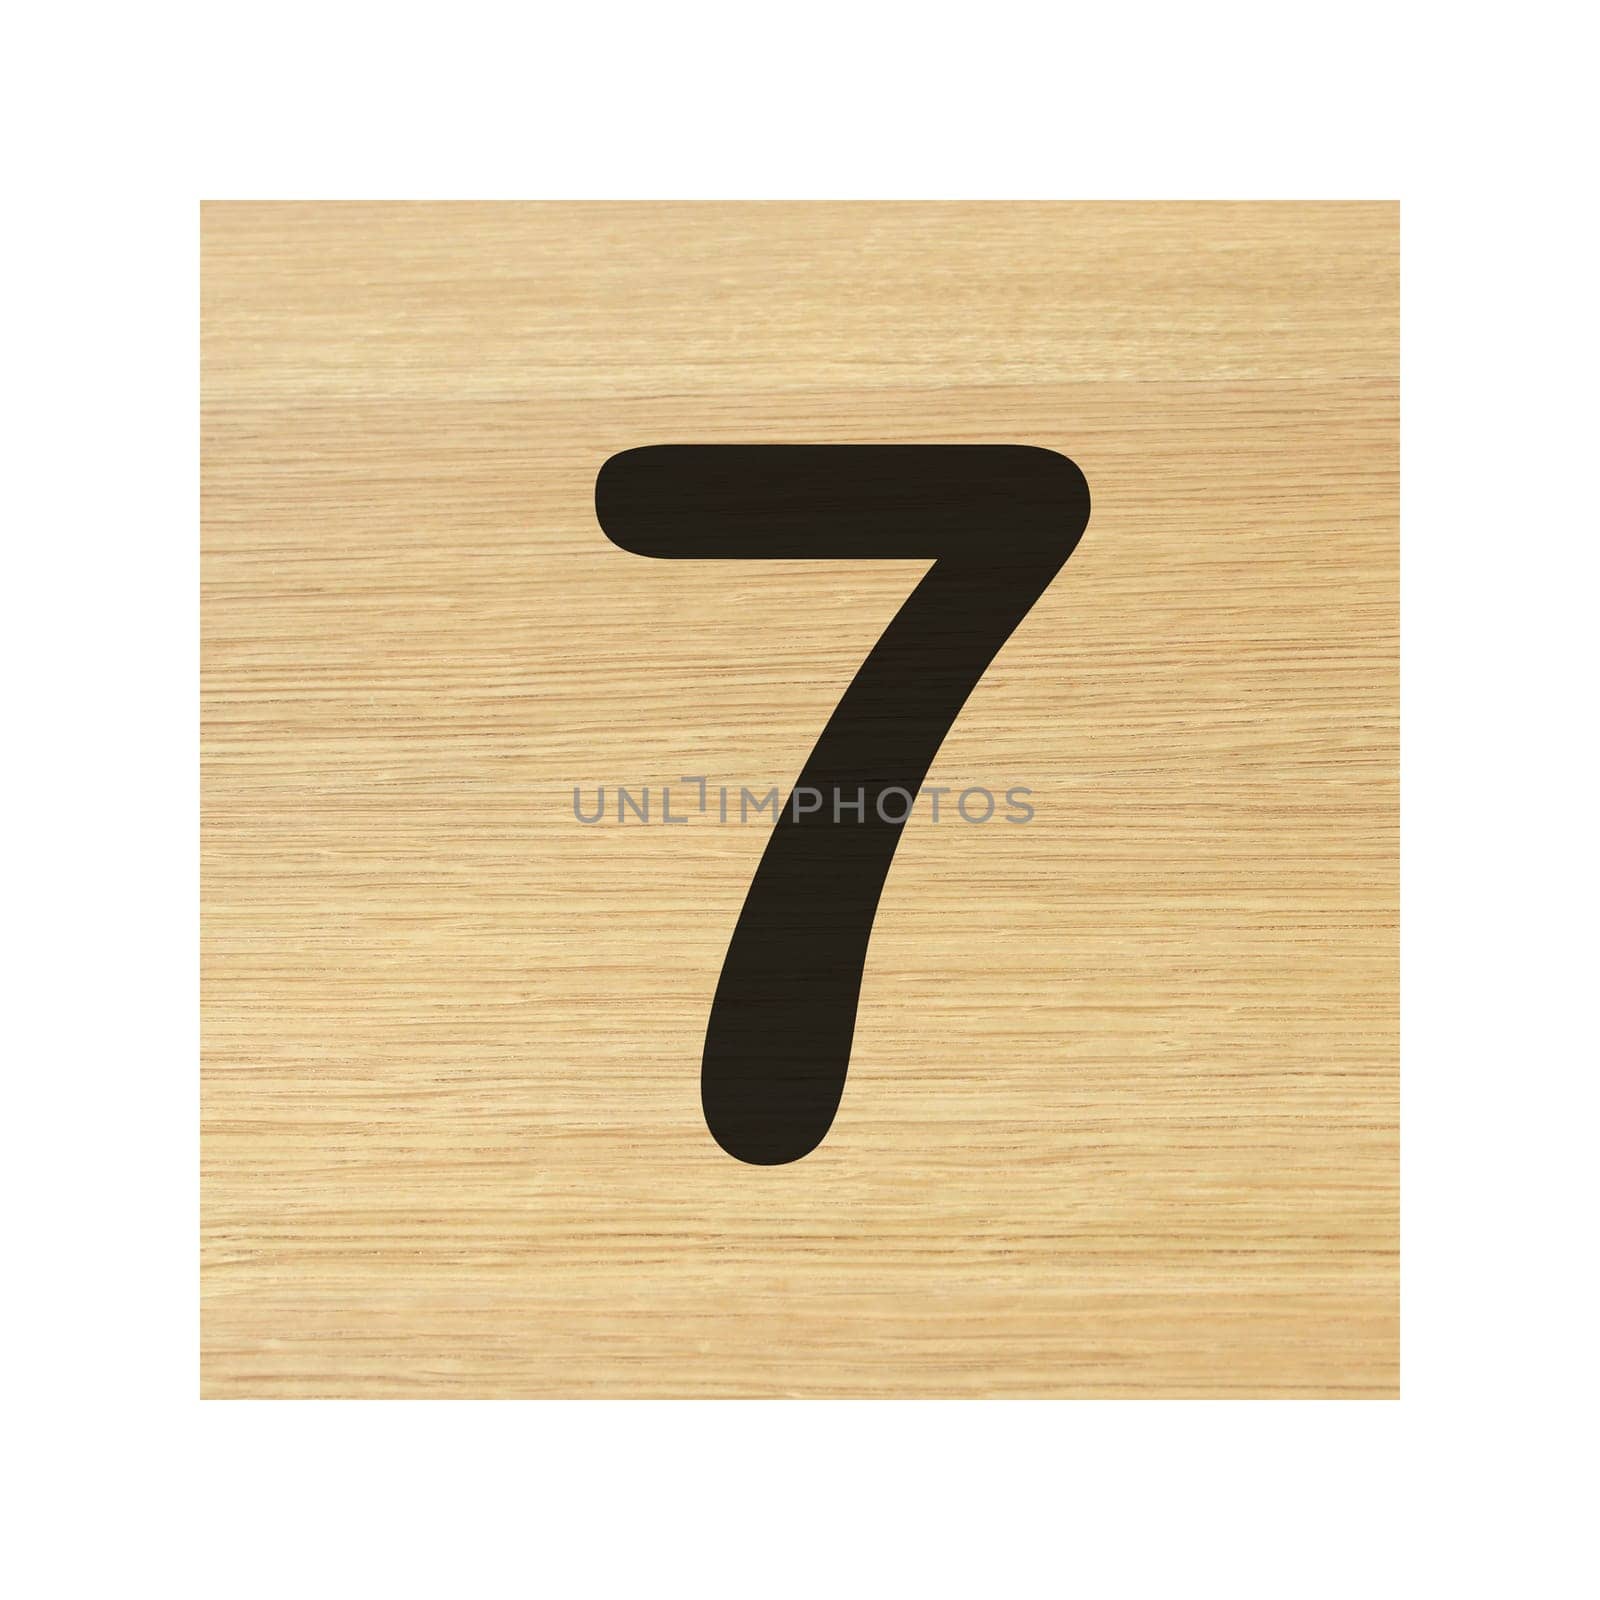 A Seven 7 wood block on white with clipping path